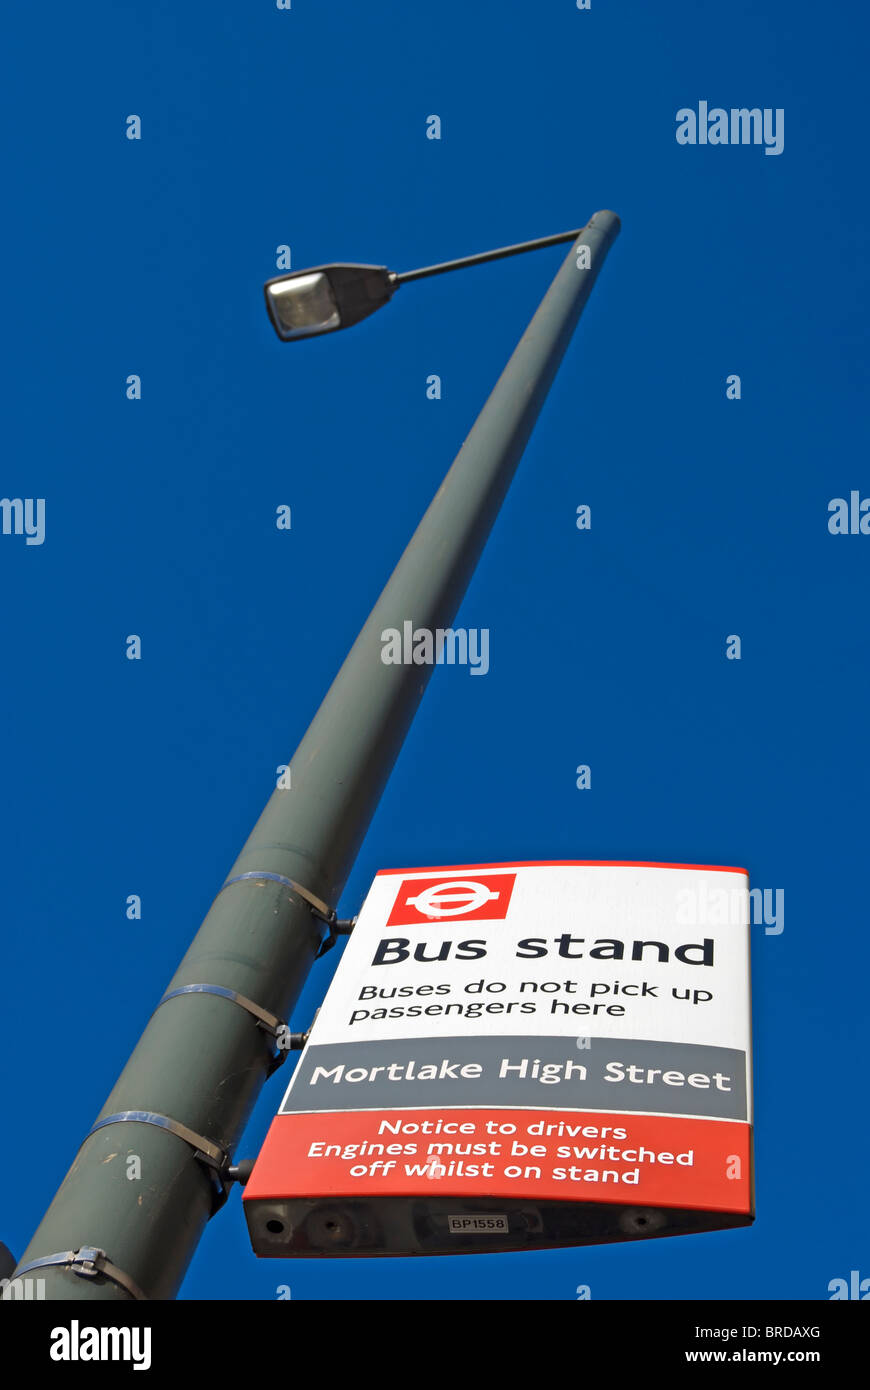 sign indicating a bus stand, where buses stop but do not pick up passengers, in mortlake, southwest london, england Stock Photo